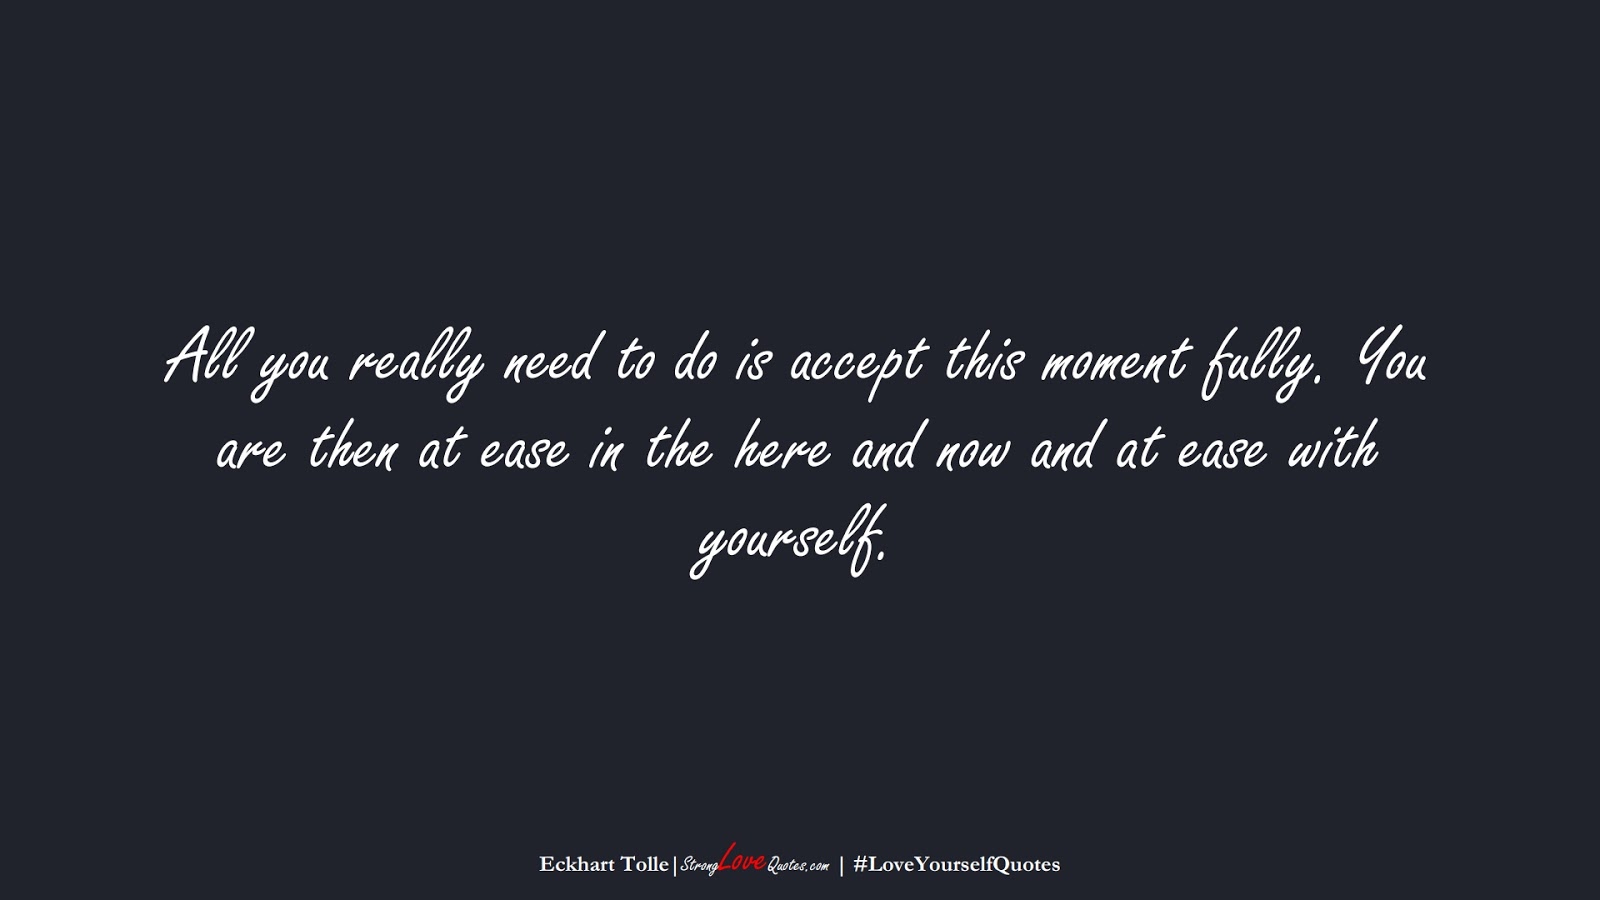 All you really need to do is accept this moment fully. You are then at ease in the here and now and at ease with yourself. (Eckhart Tolle);  #LoveYourselfQuotes